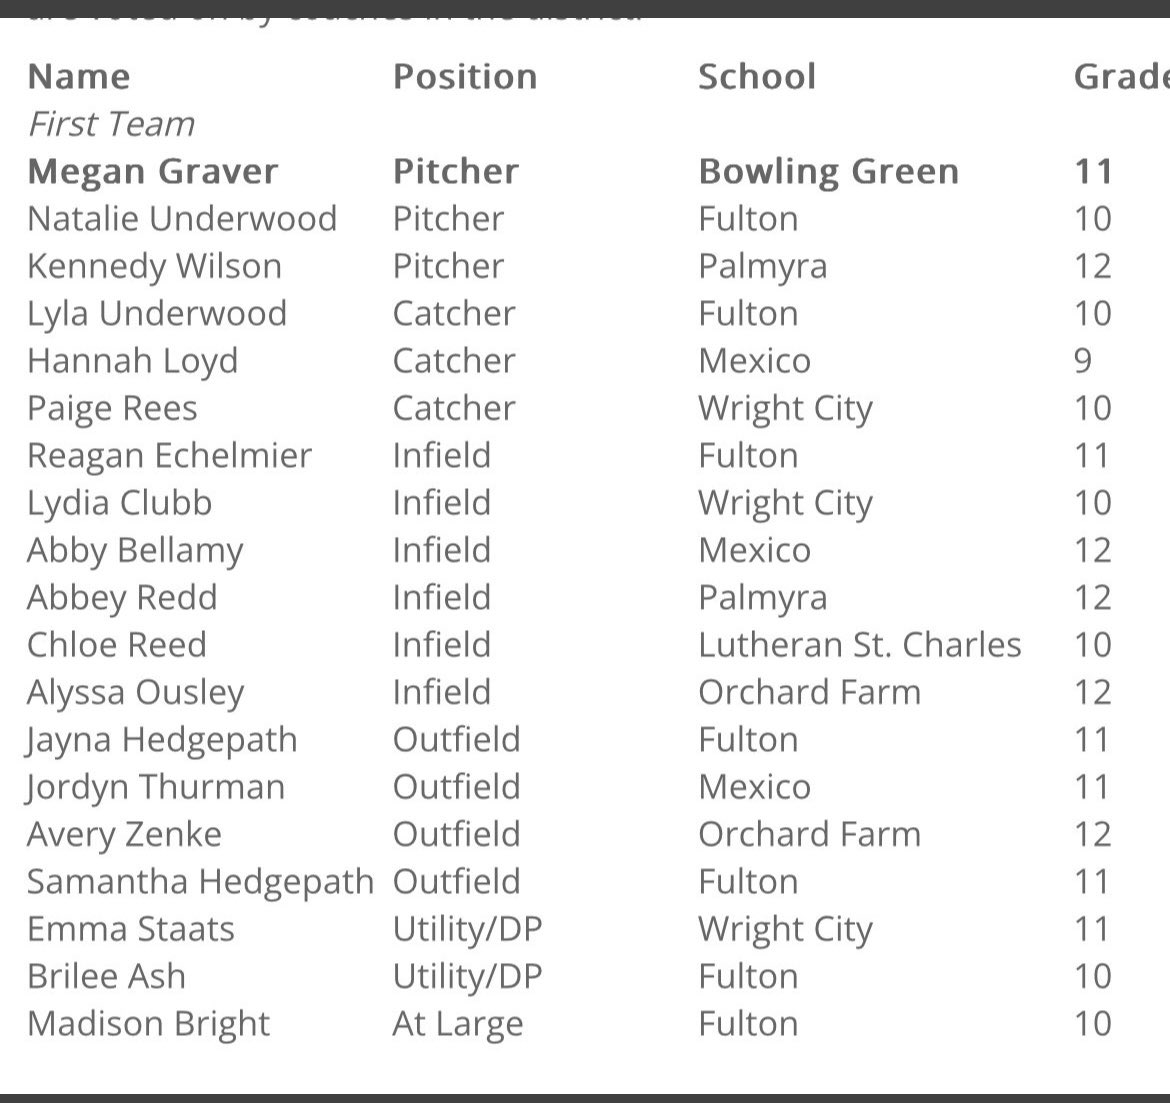 So excited to say that I was named first team all district for catcher! Congrats to @emmastaats2024 and @lydia_clubb for being named first team all district as well. I also was given the athlete of the month award from my school! @SluggersArnold @wrightcitysb @CoachRat29